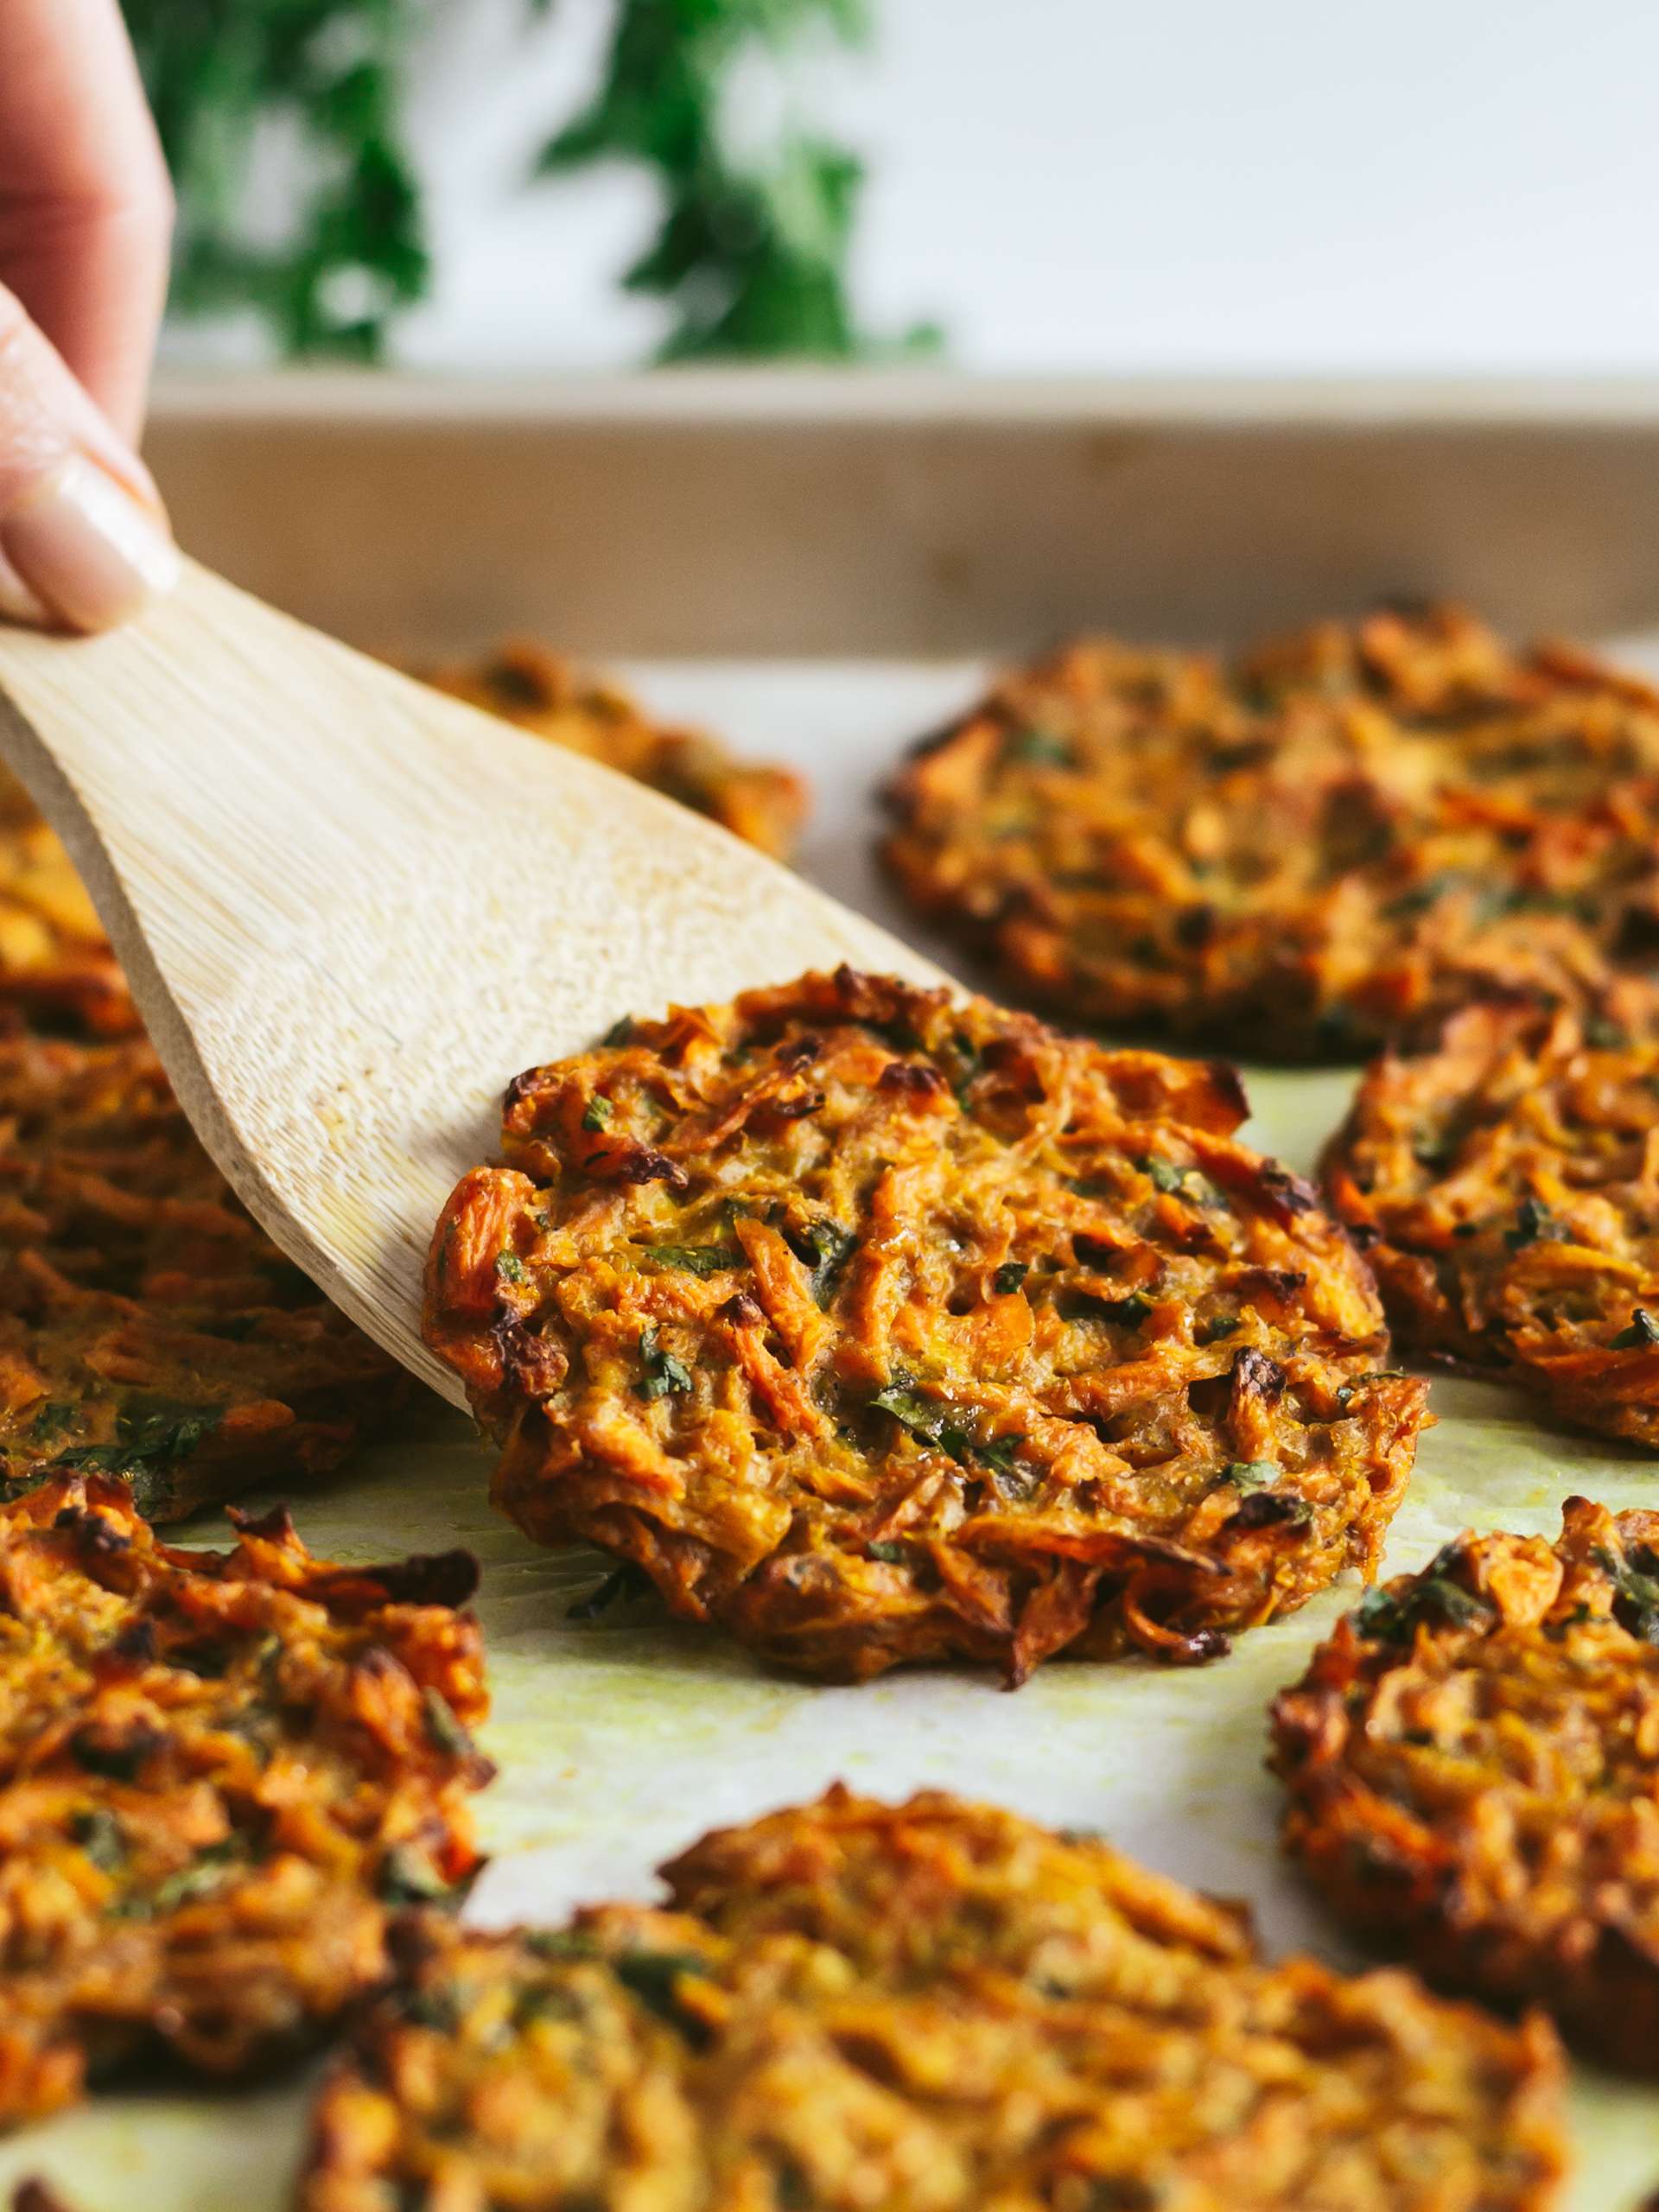 baked carrot hash browns